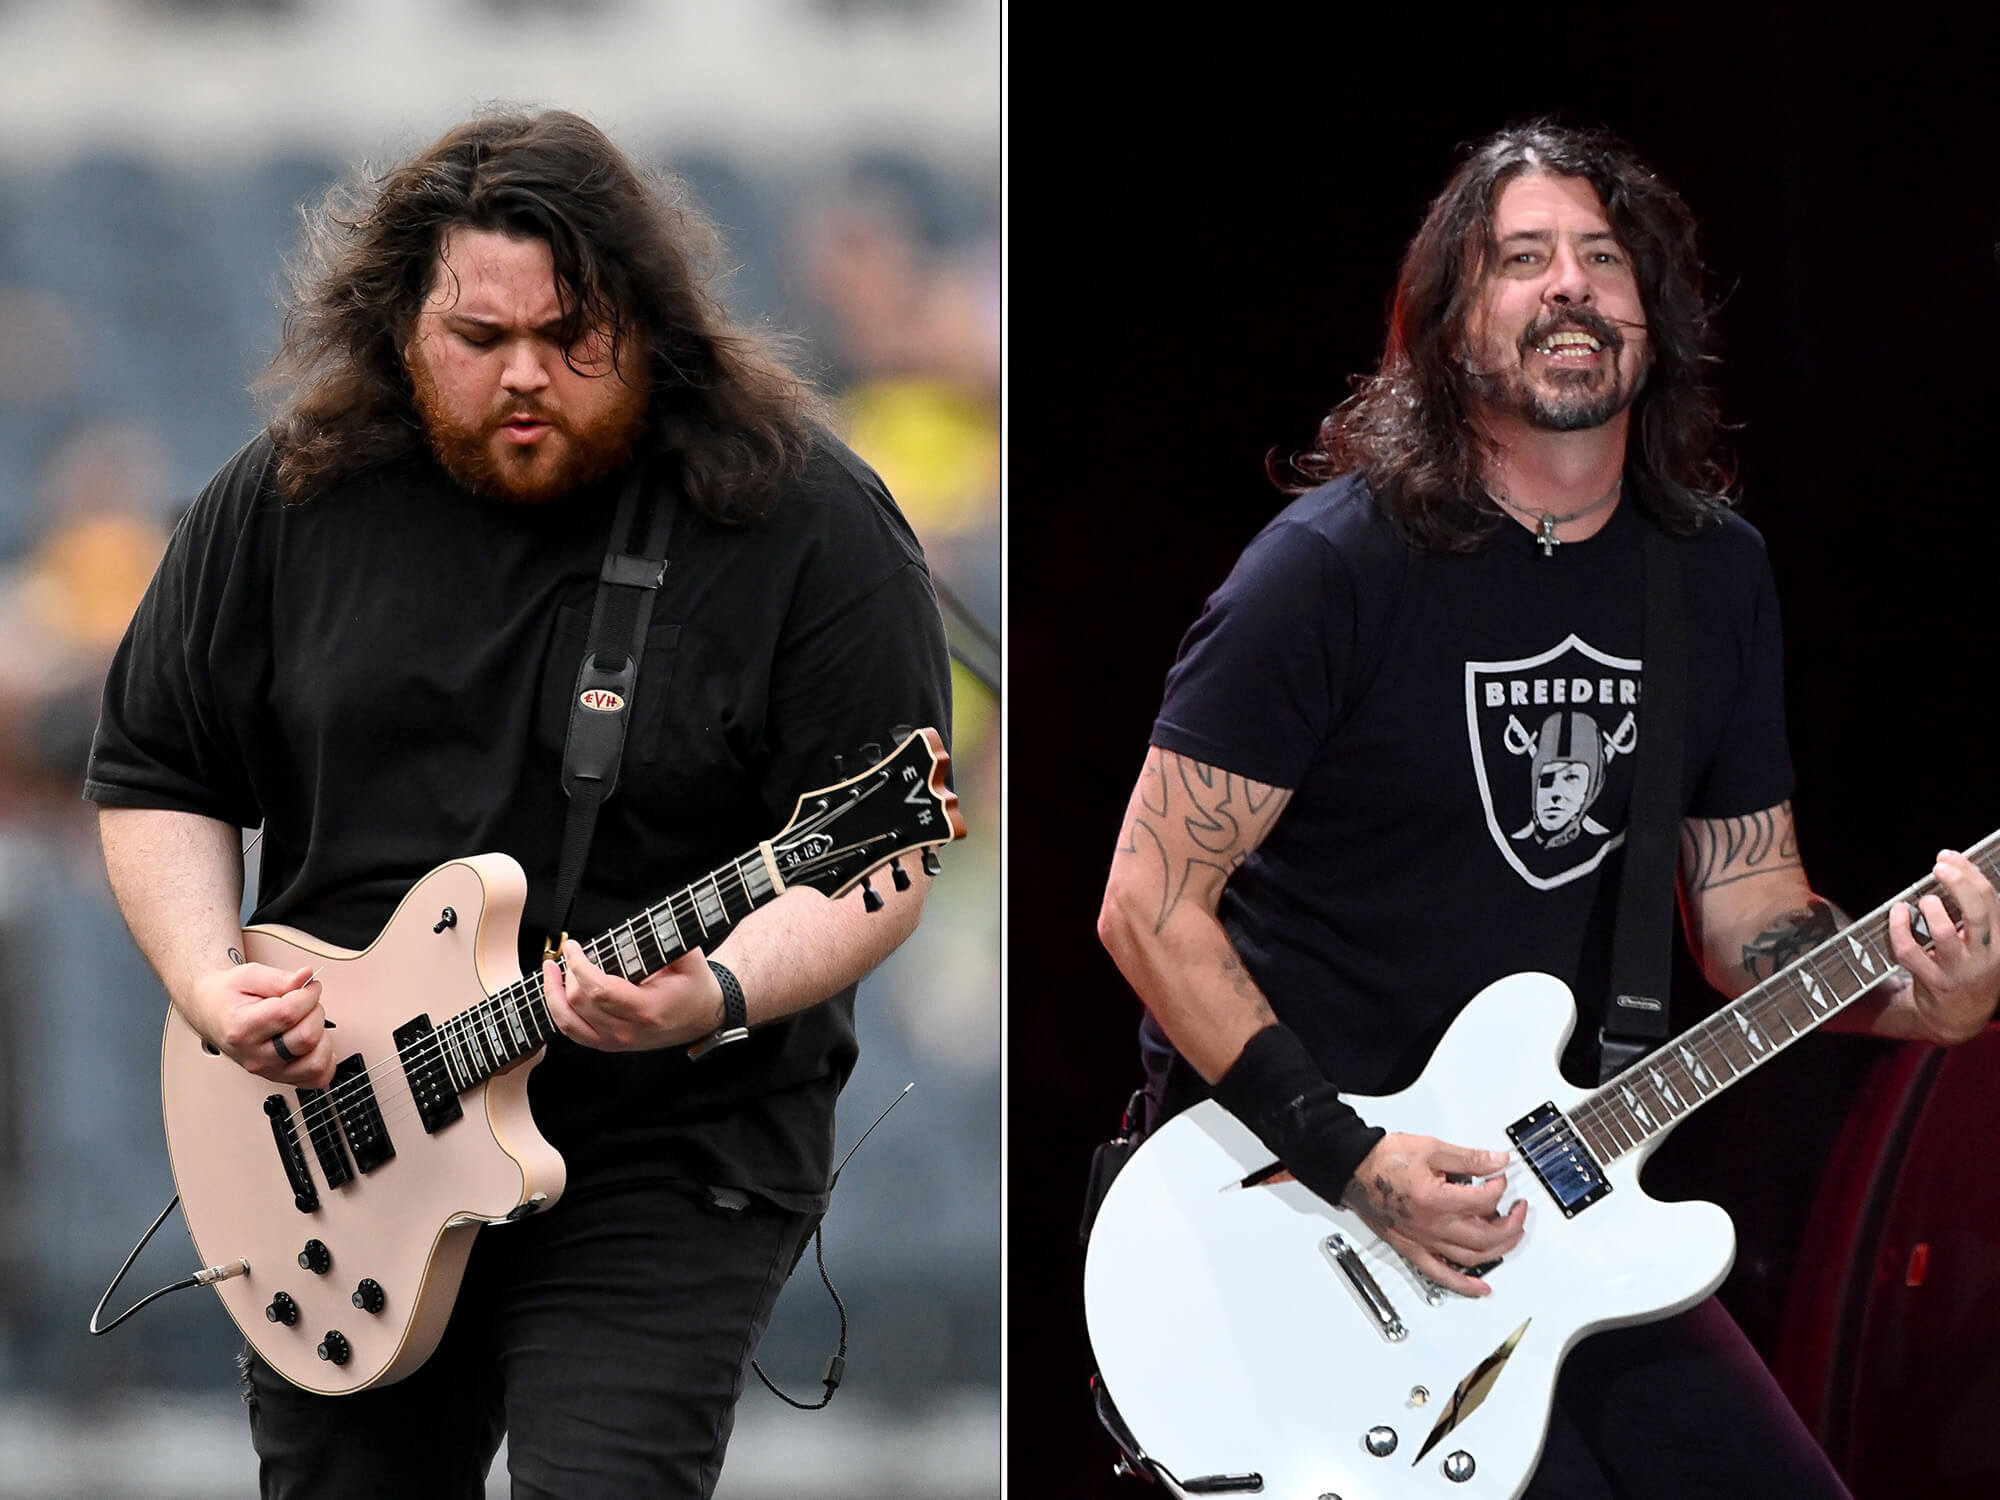 dave-grohl-wvh@2000x1500